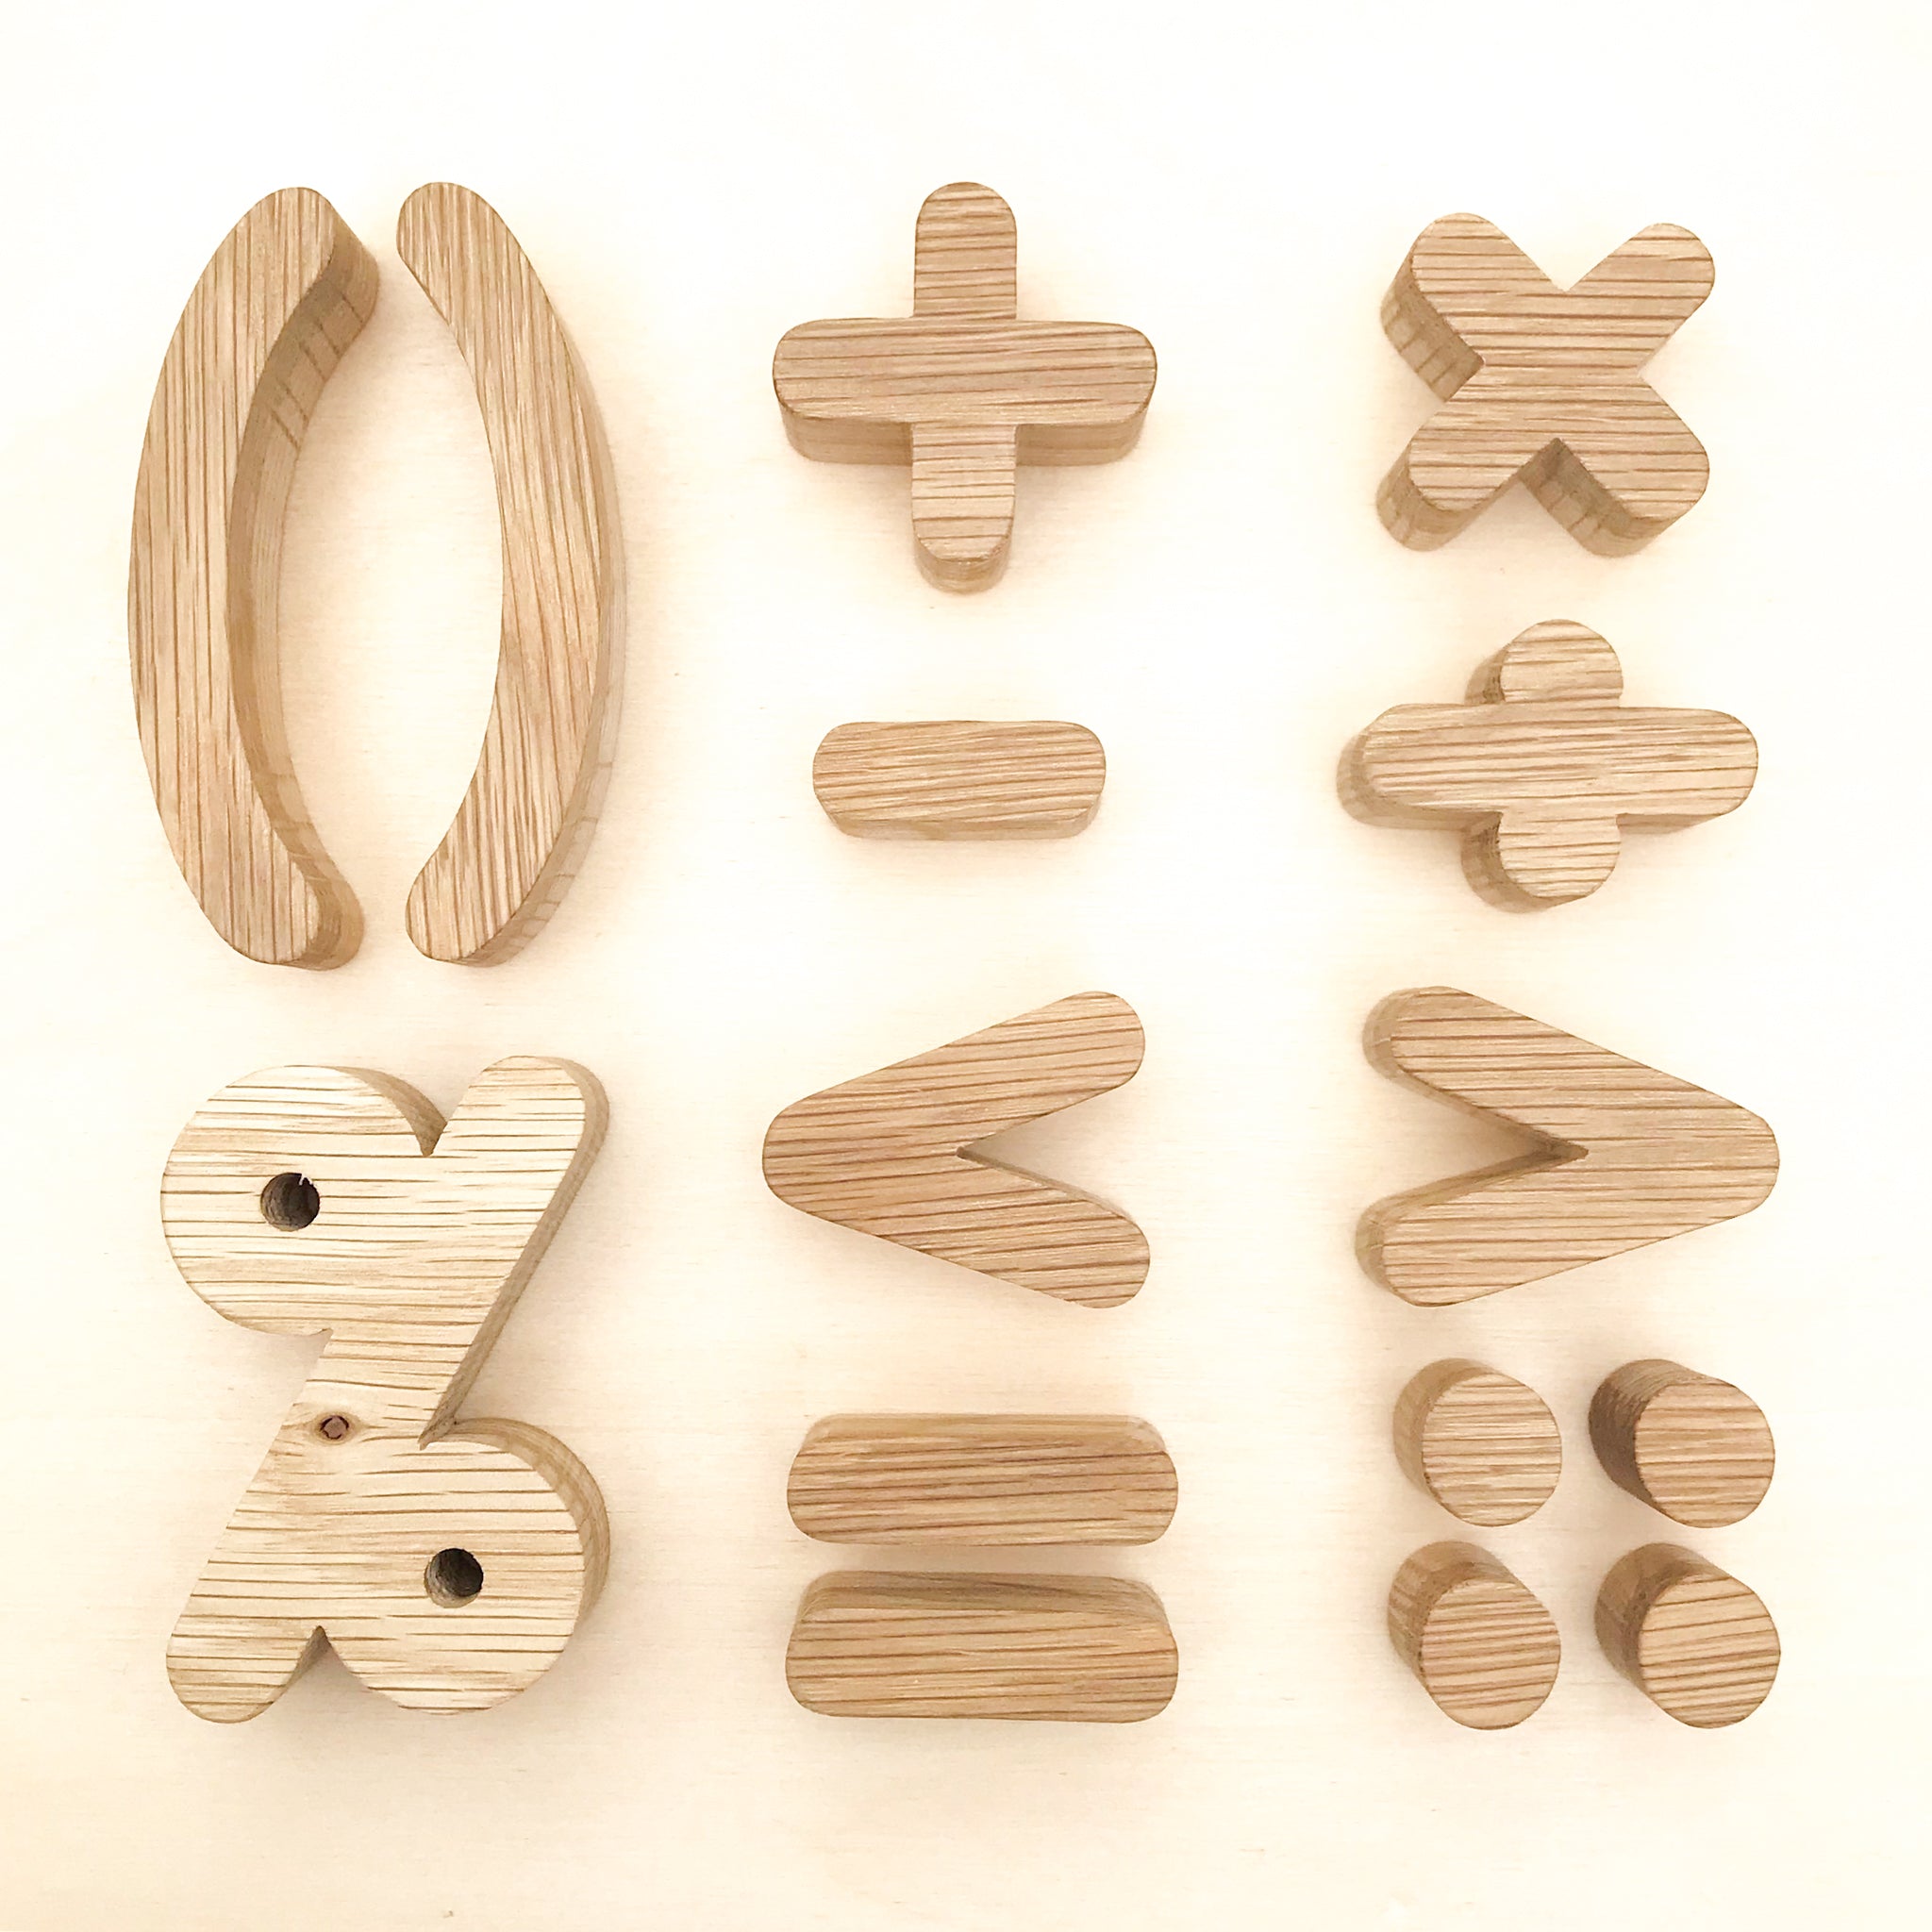 Wooden Oak Education math symbols. Included + - = % ÷ < > ( ) . . . on a wooden background